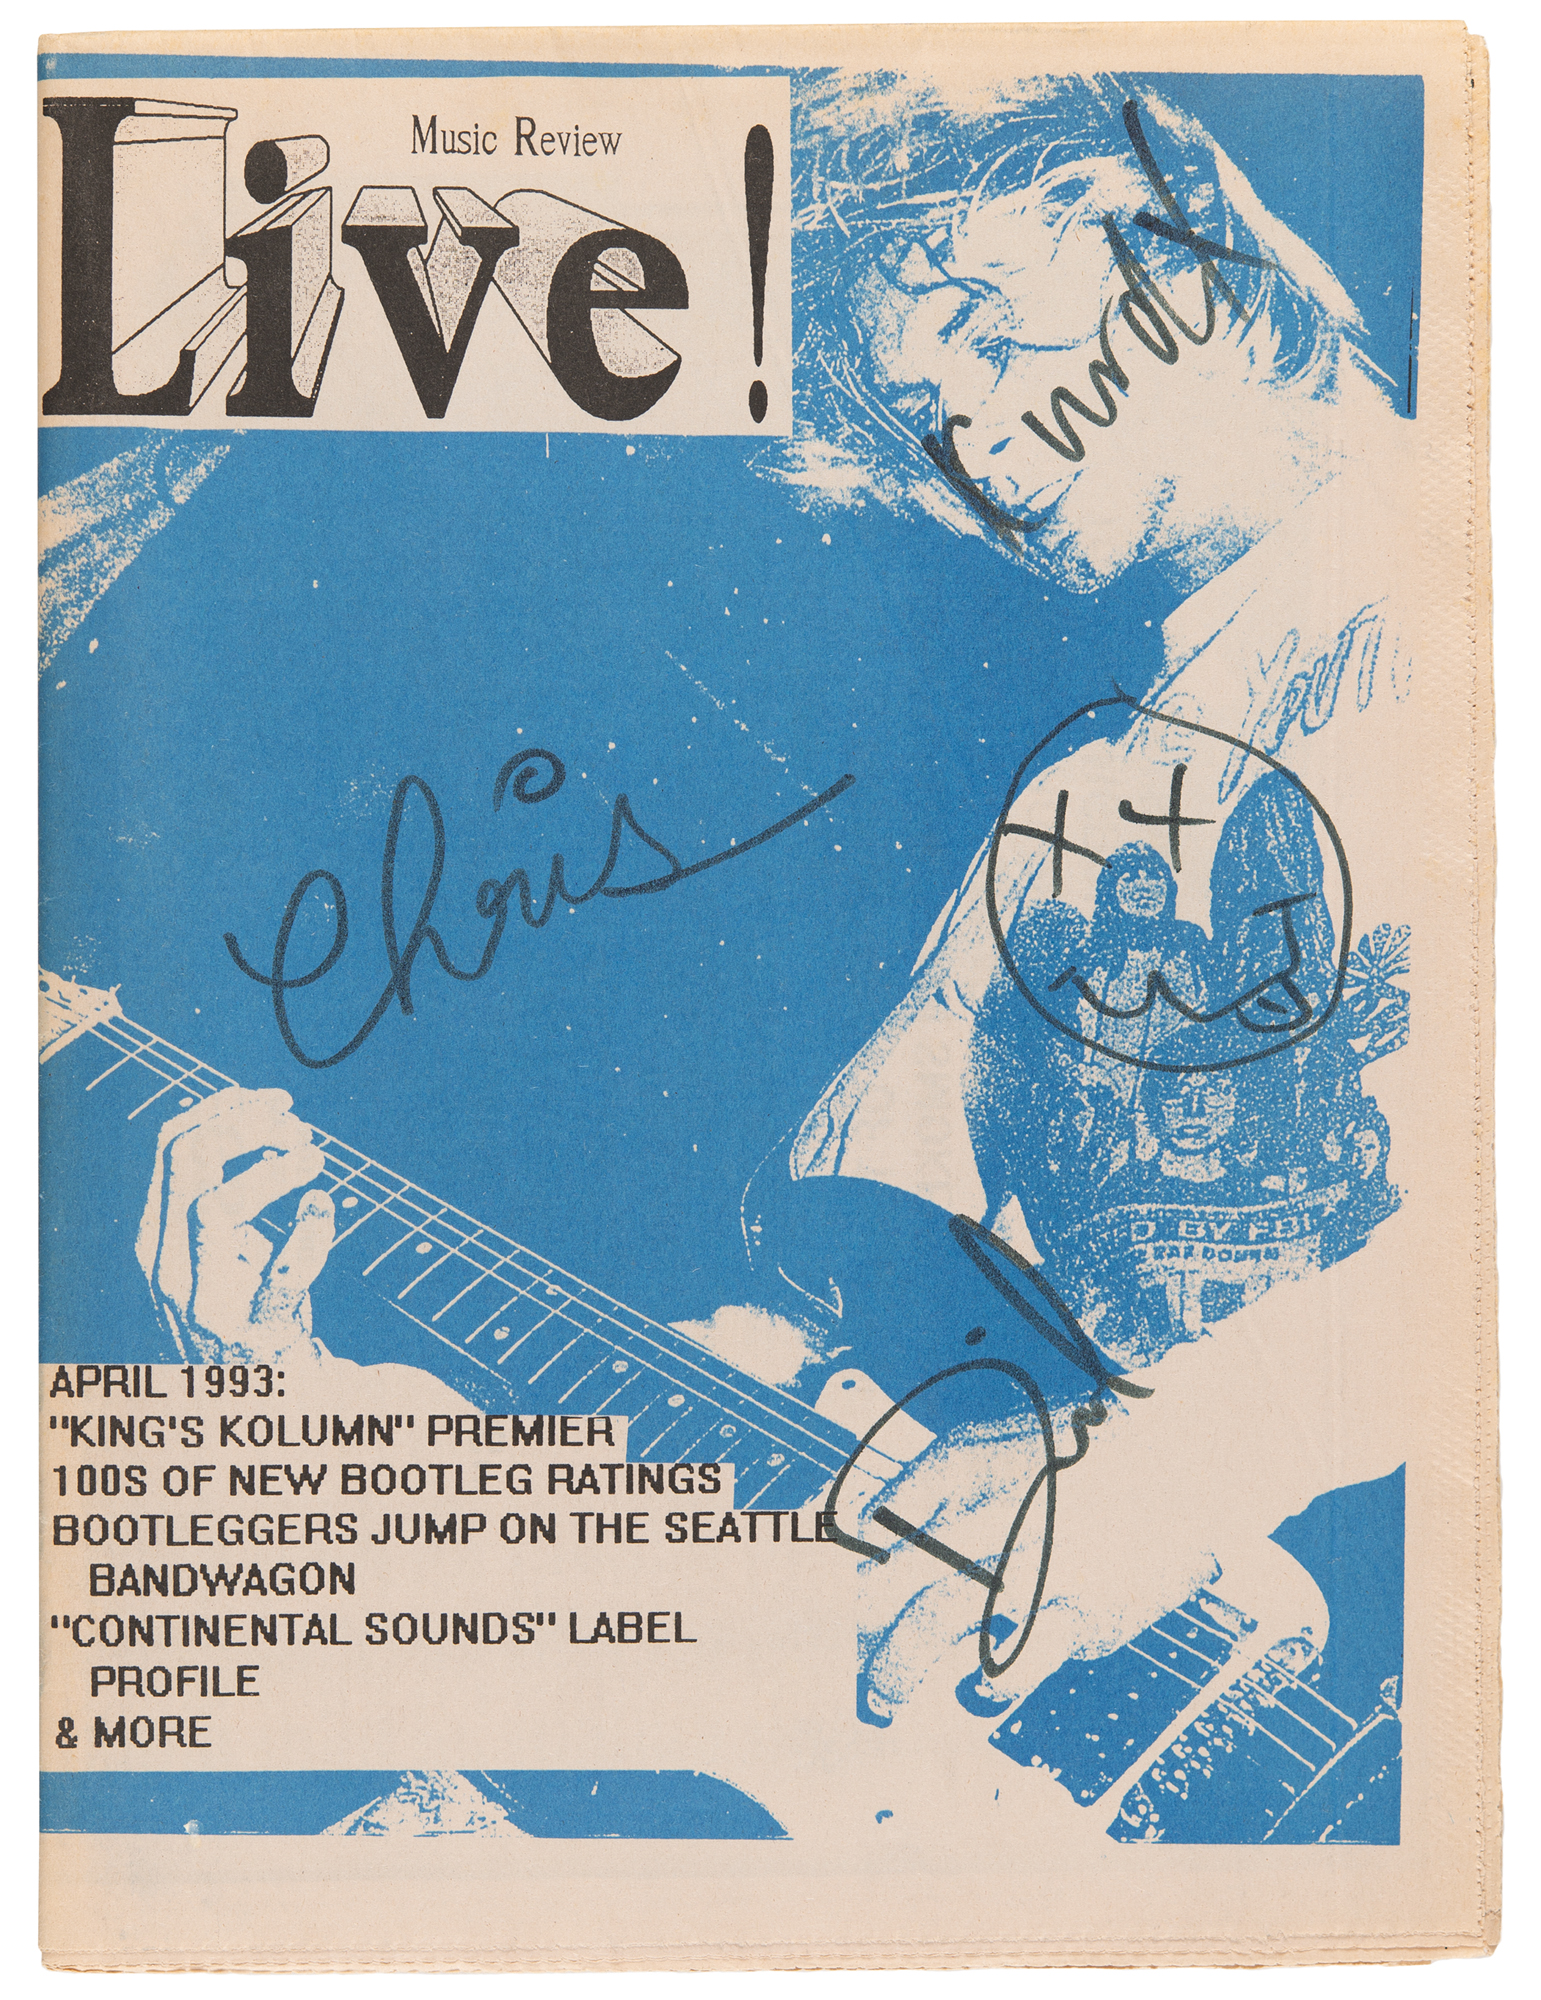 Lot #556 Nirvana Signed Live! Music Review